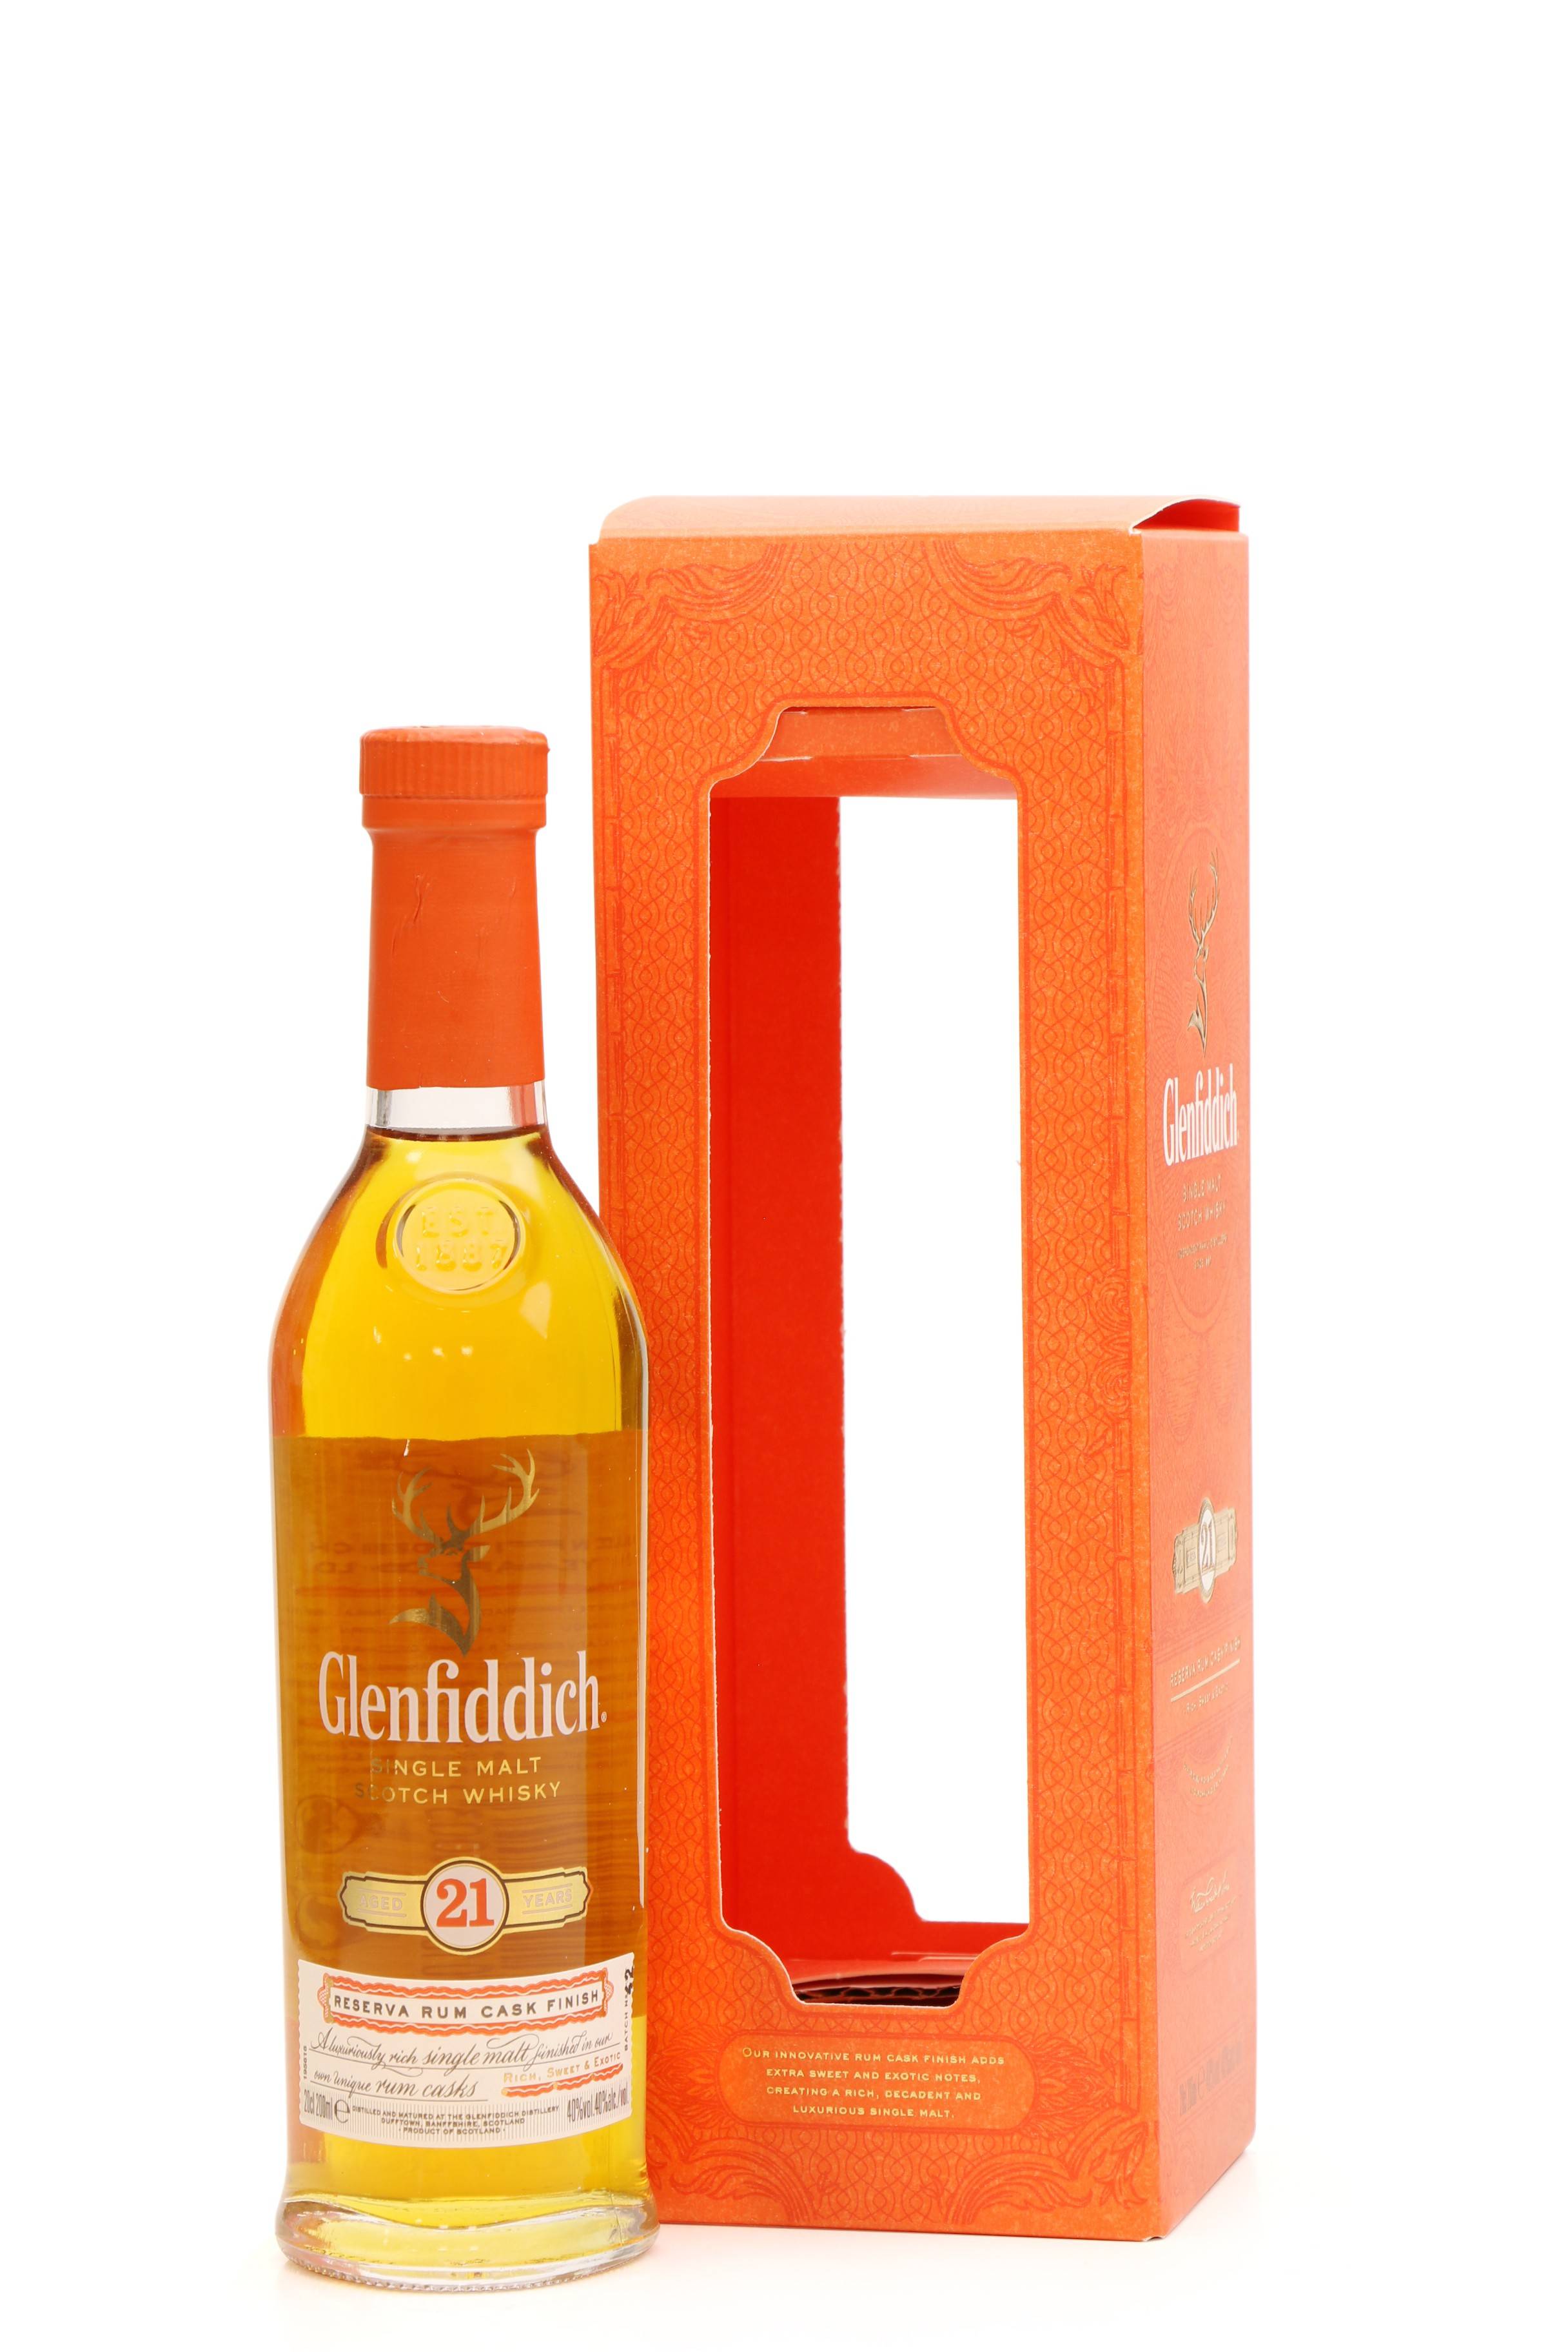 Glenfiddich 21 Year Old Reserva Rum Cask Finish Whisky - 20cl 40%